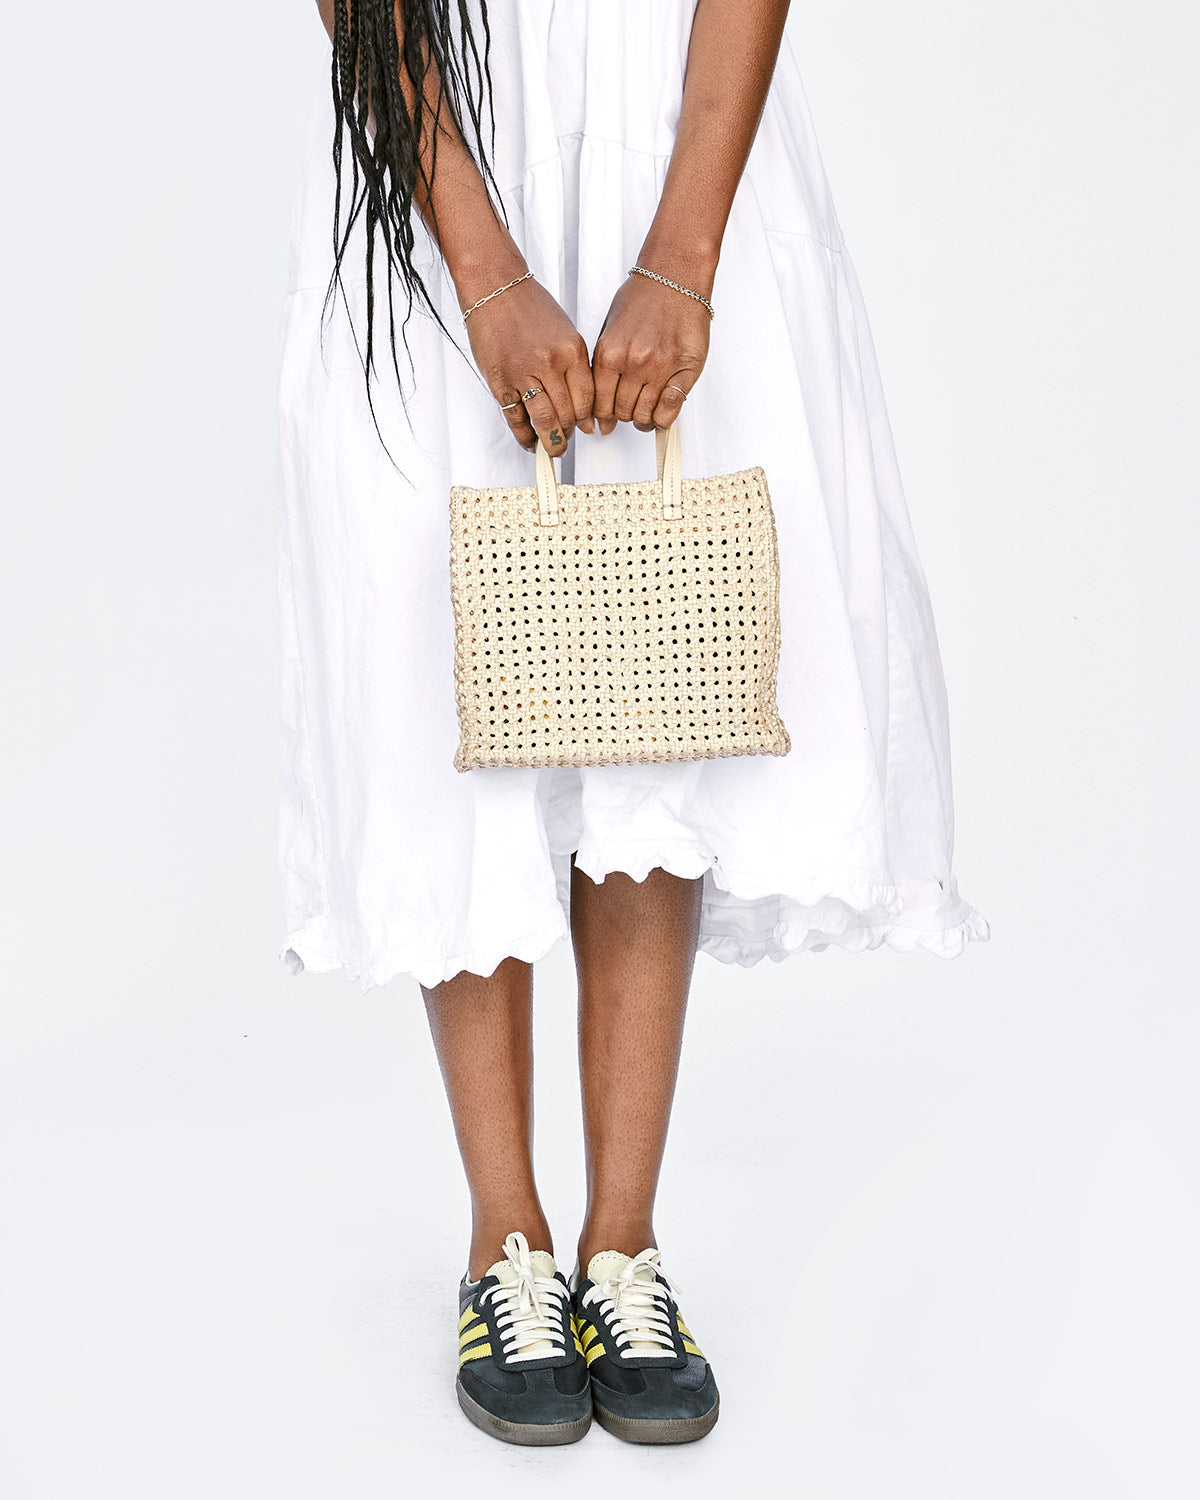 Mecca Holding the Cream Rattan Petit Simple Tote in Front of her White Dress